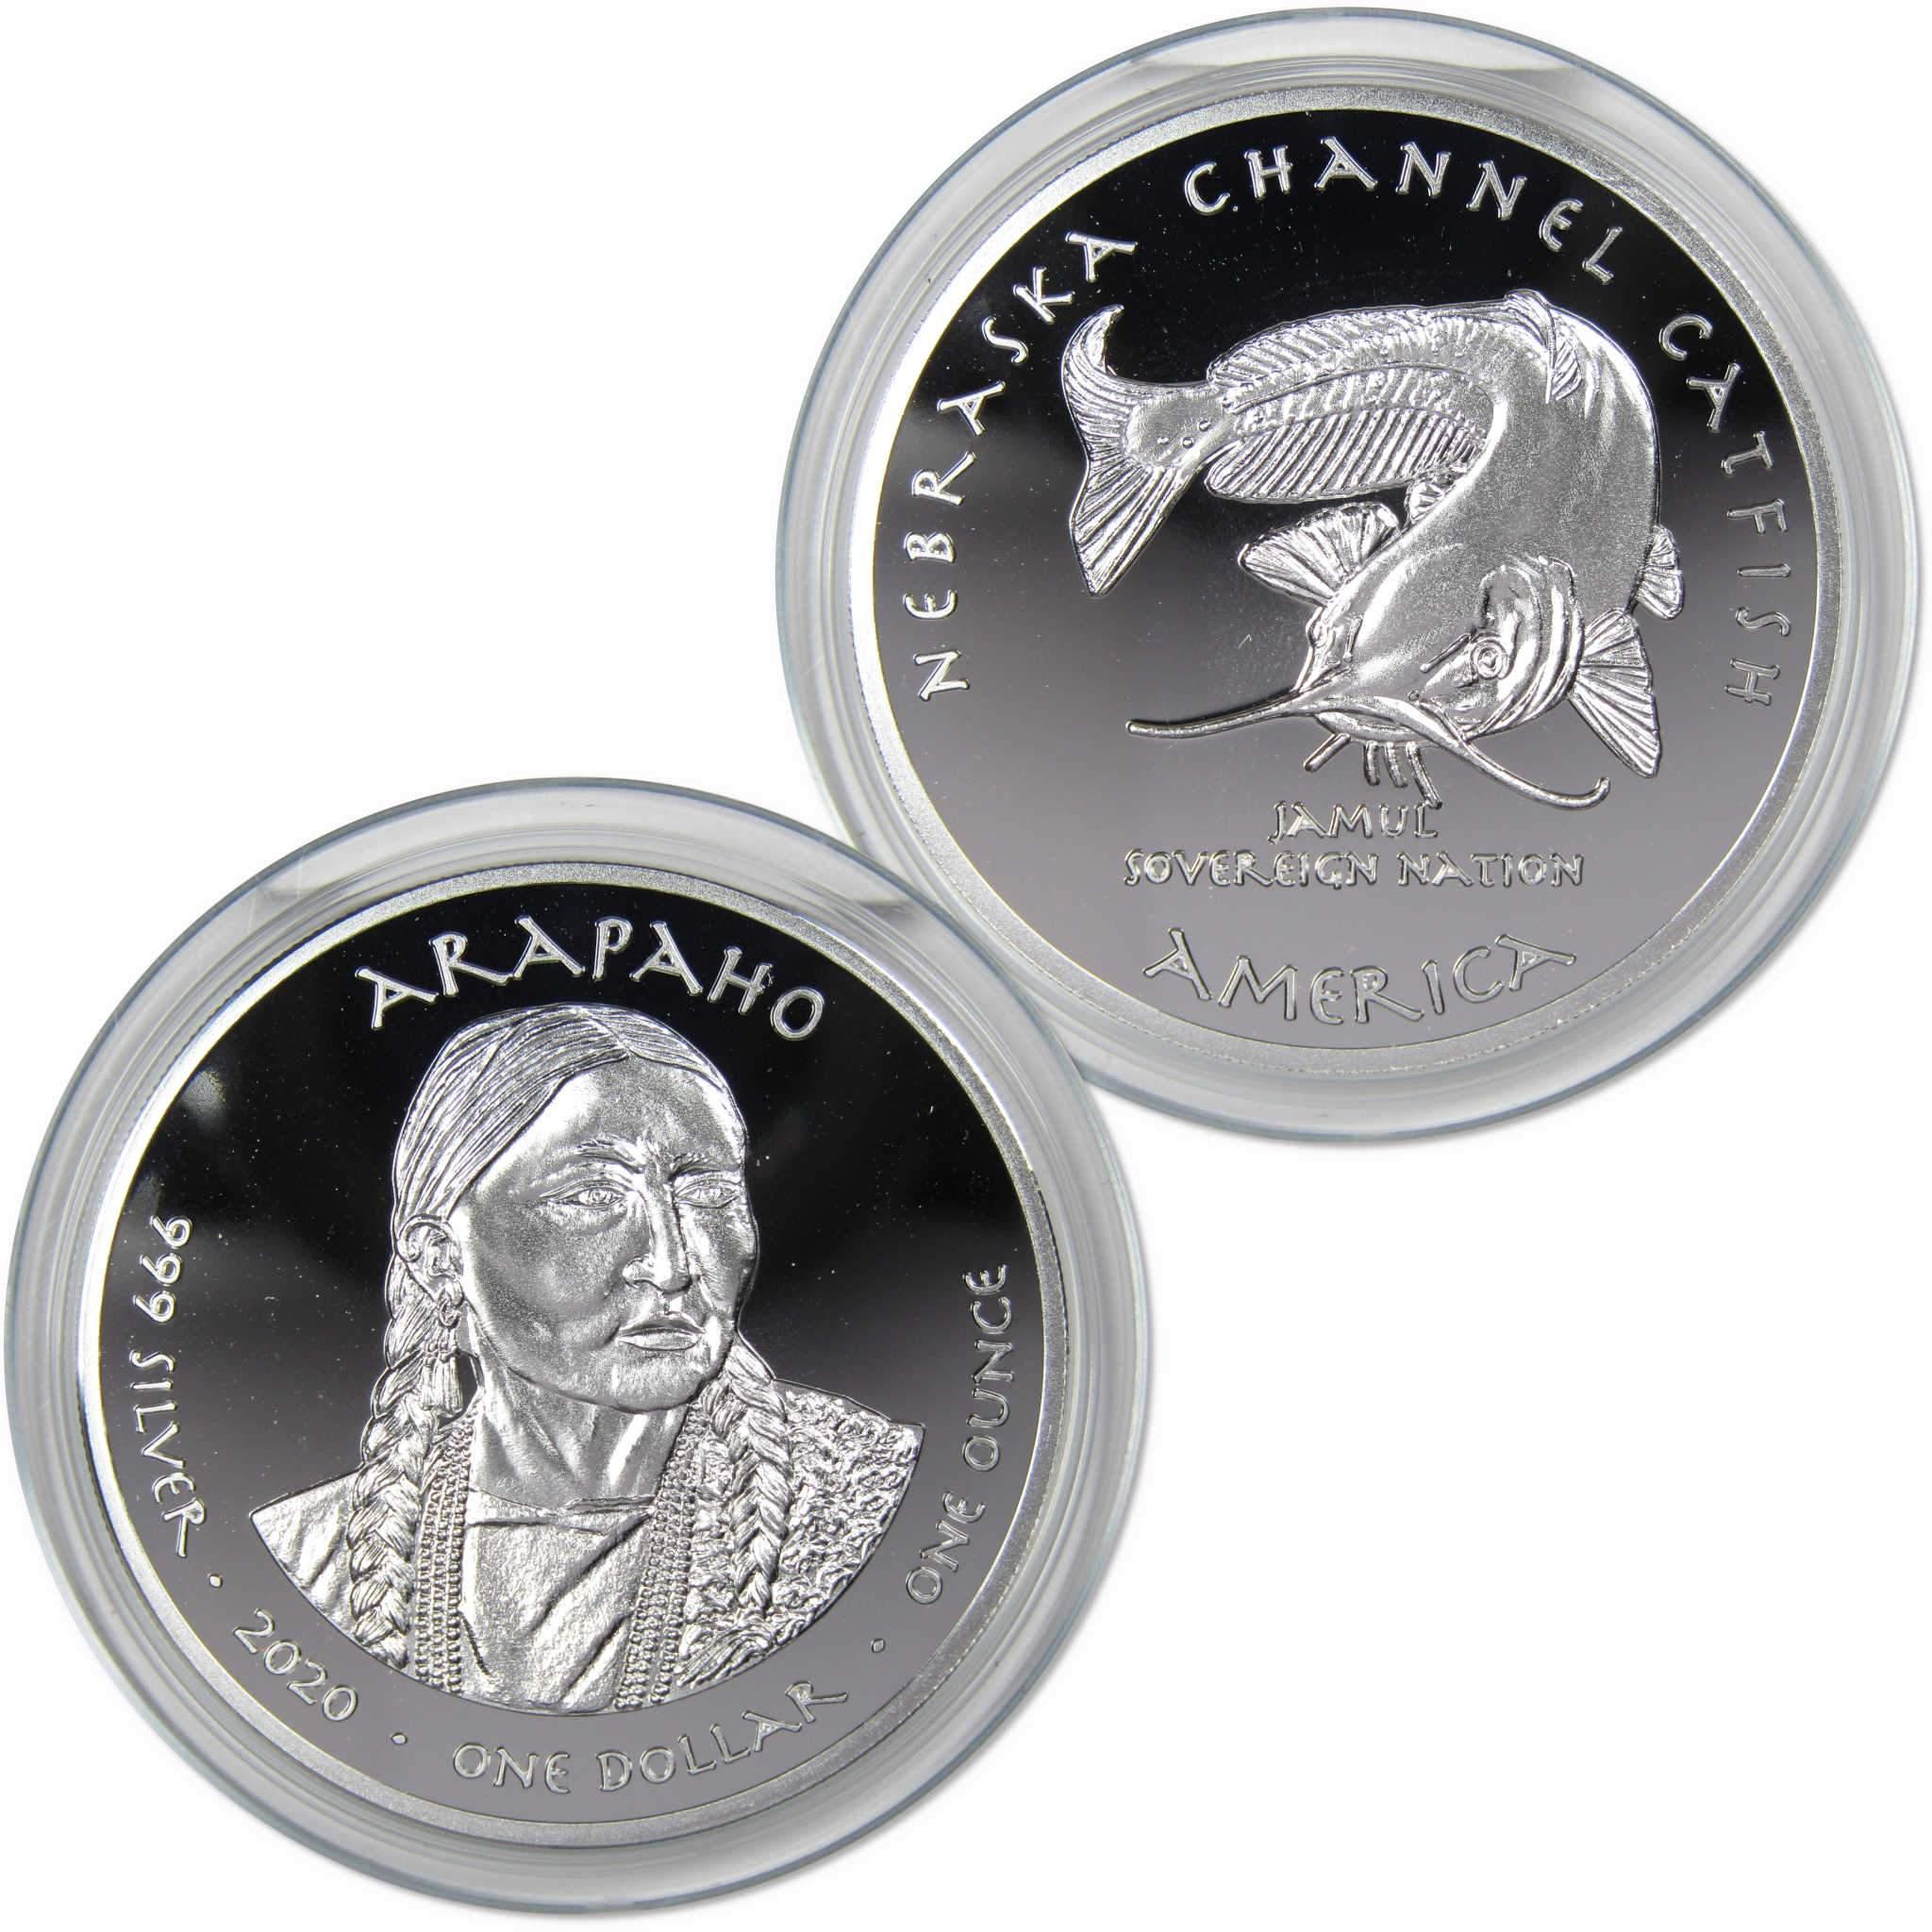 2020 Native American Jamul Arapaho Channel Catfish 1 oz .999 Silver $1 Proof